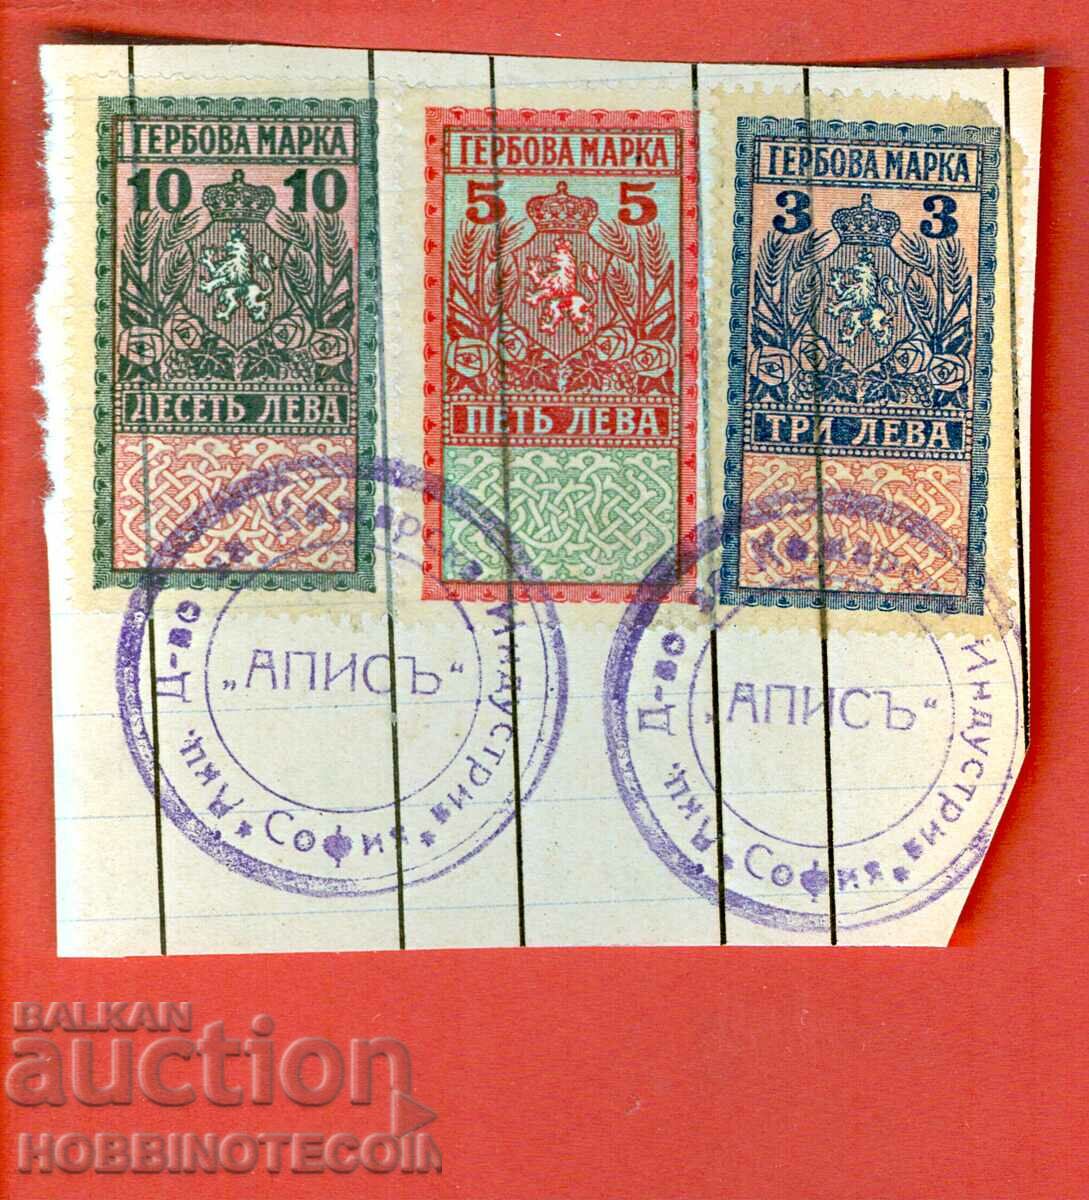 BULGARIA TIMBRIE TIMBRIE TIMBRIE 3 5 10 leva - 1925